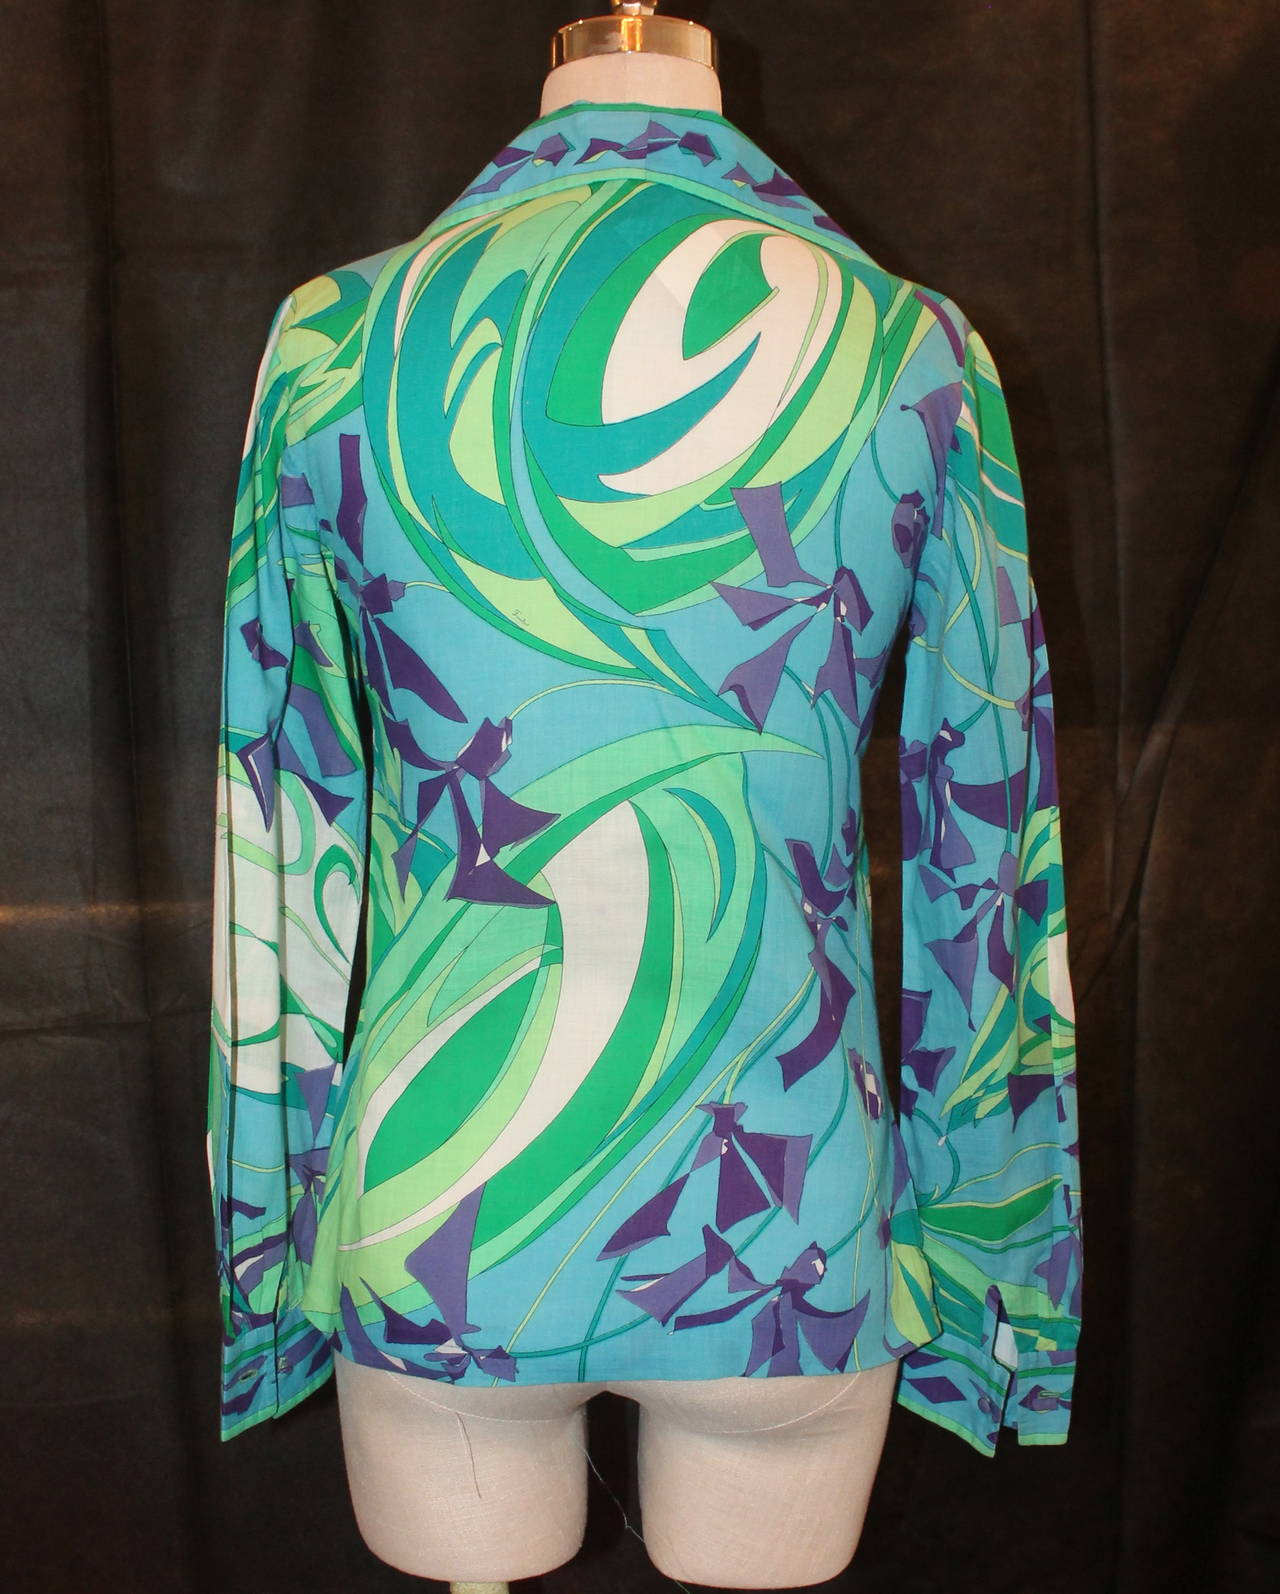 Pucci Vintage Teal Floral Print Jacket/Shirt - circa 1960s - S In Good Condition For Sale In West Palm Beach, FL